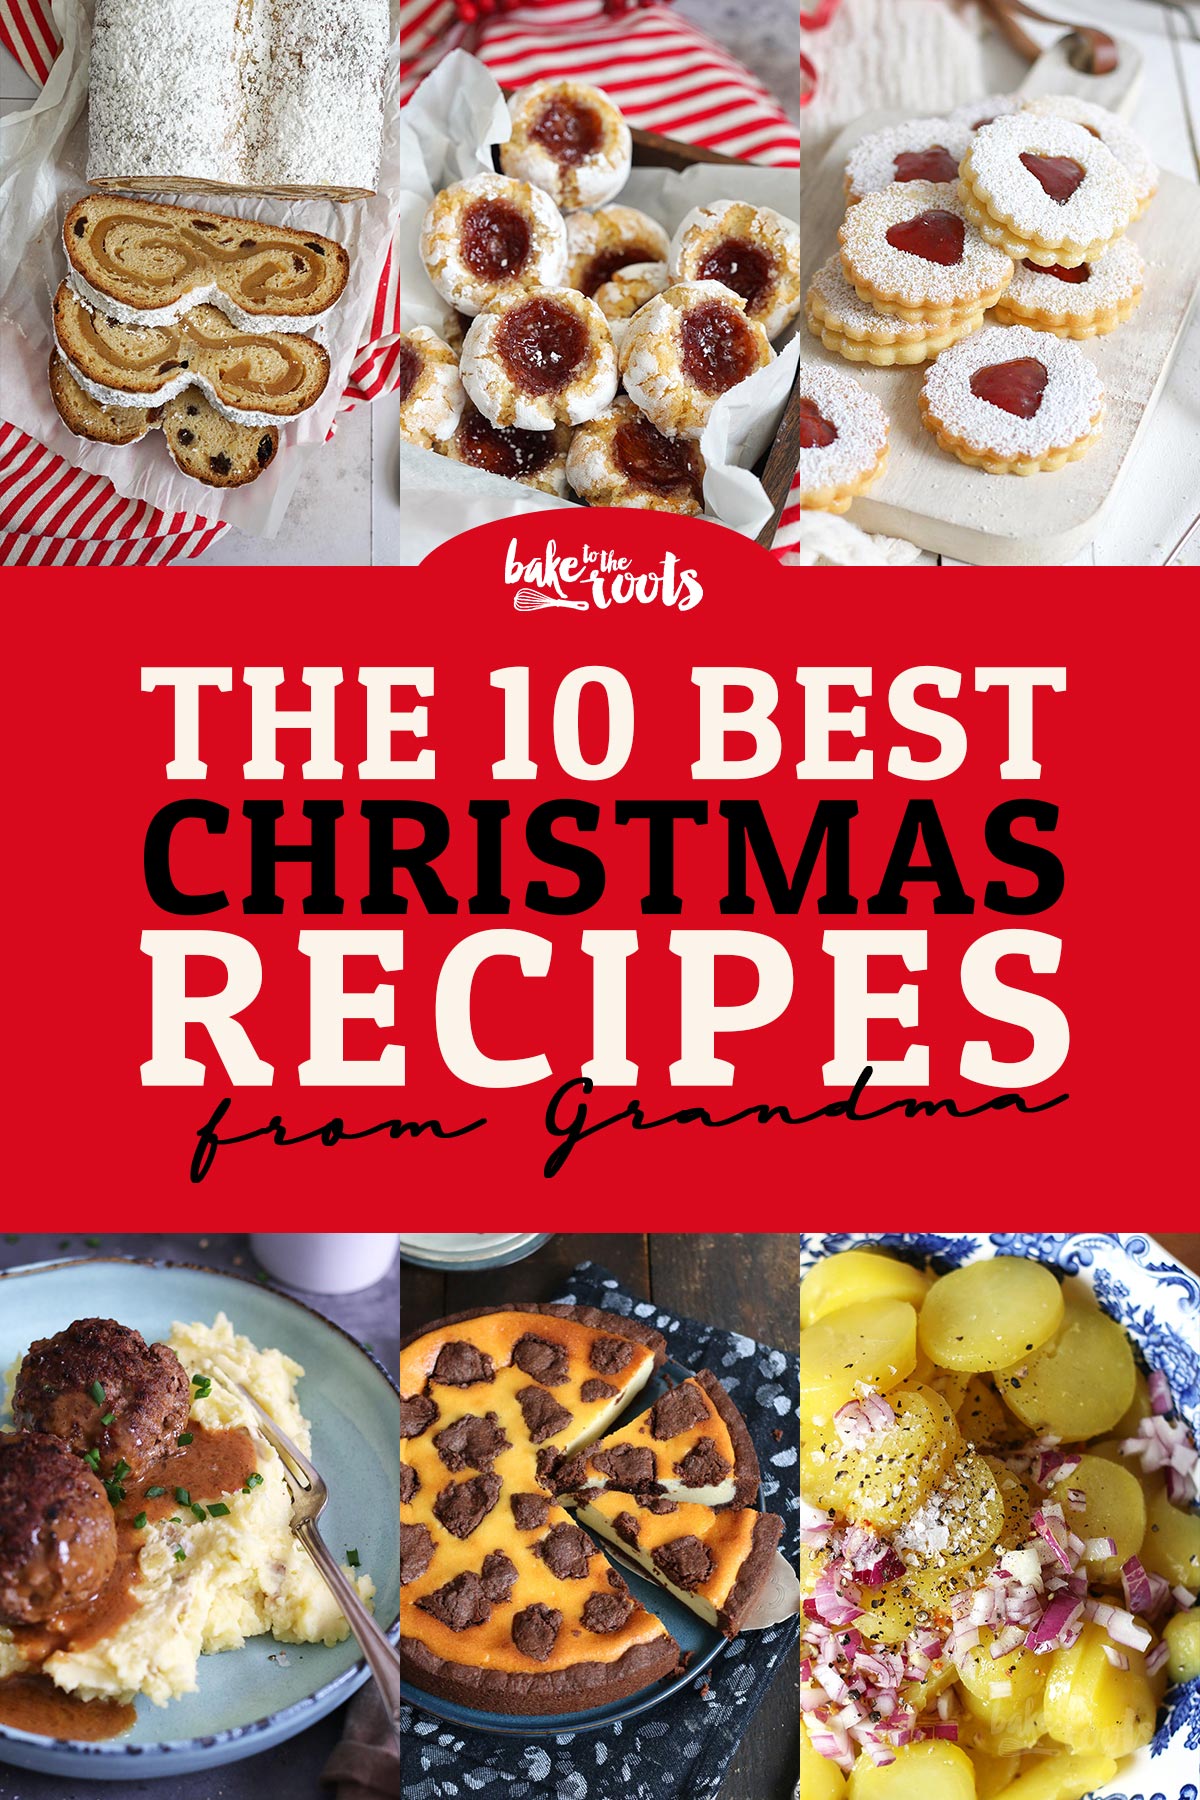 The 10 Best Christmas Recipes from Grandma | Bake to the roots